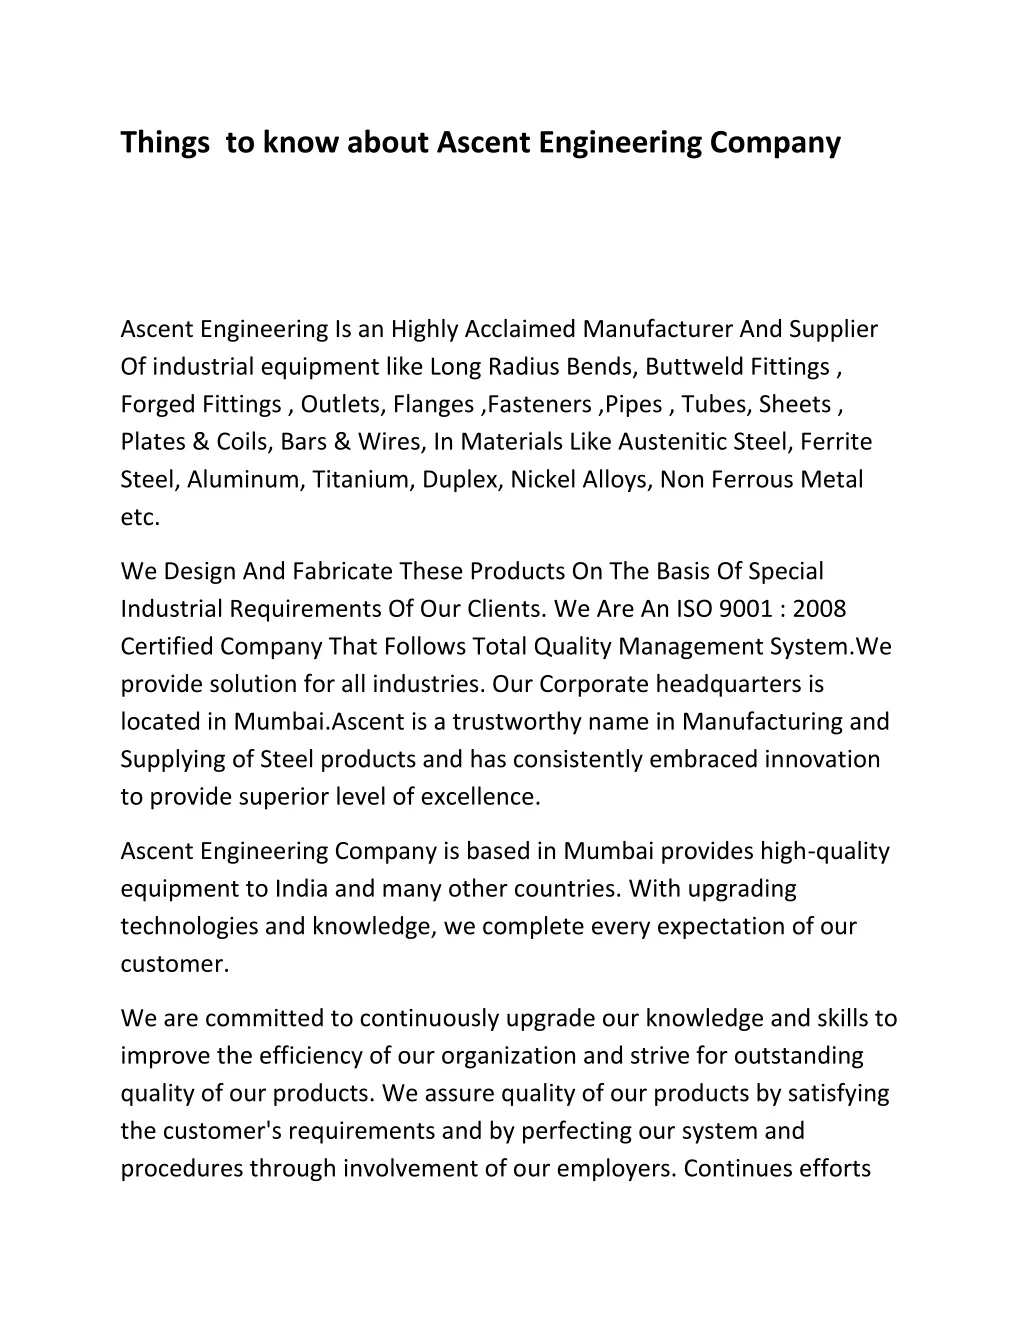 things to know about ascent engineering company